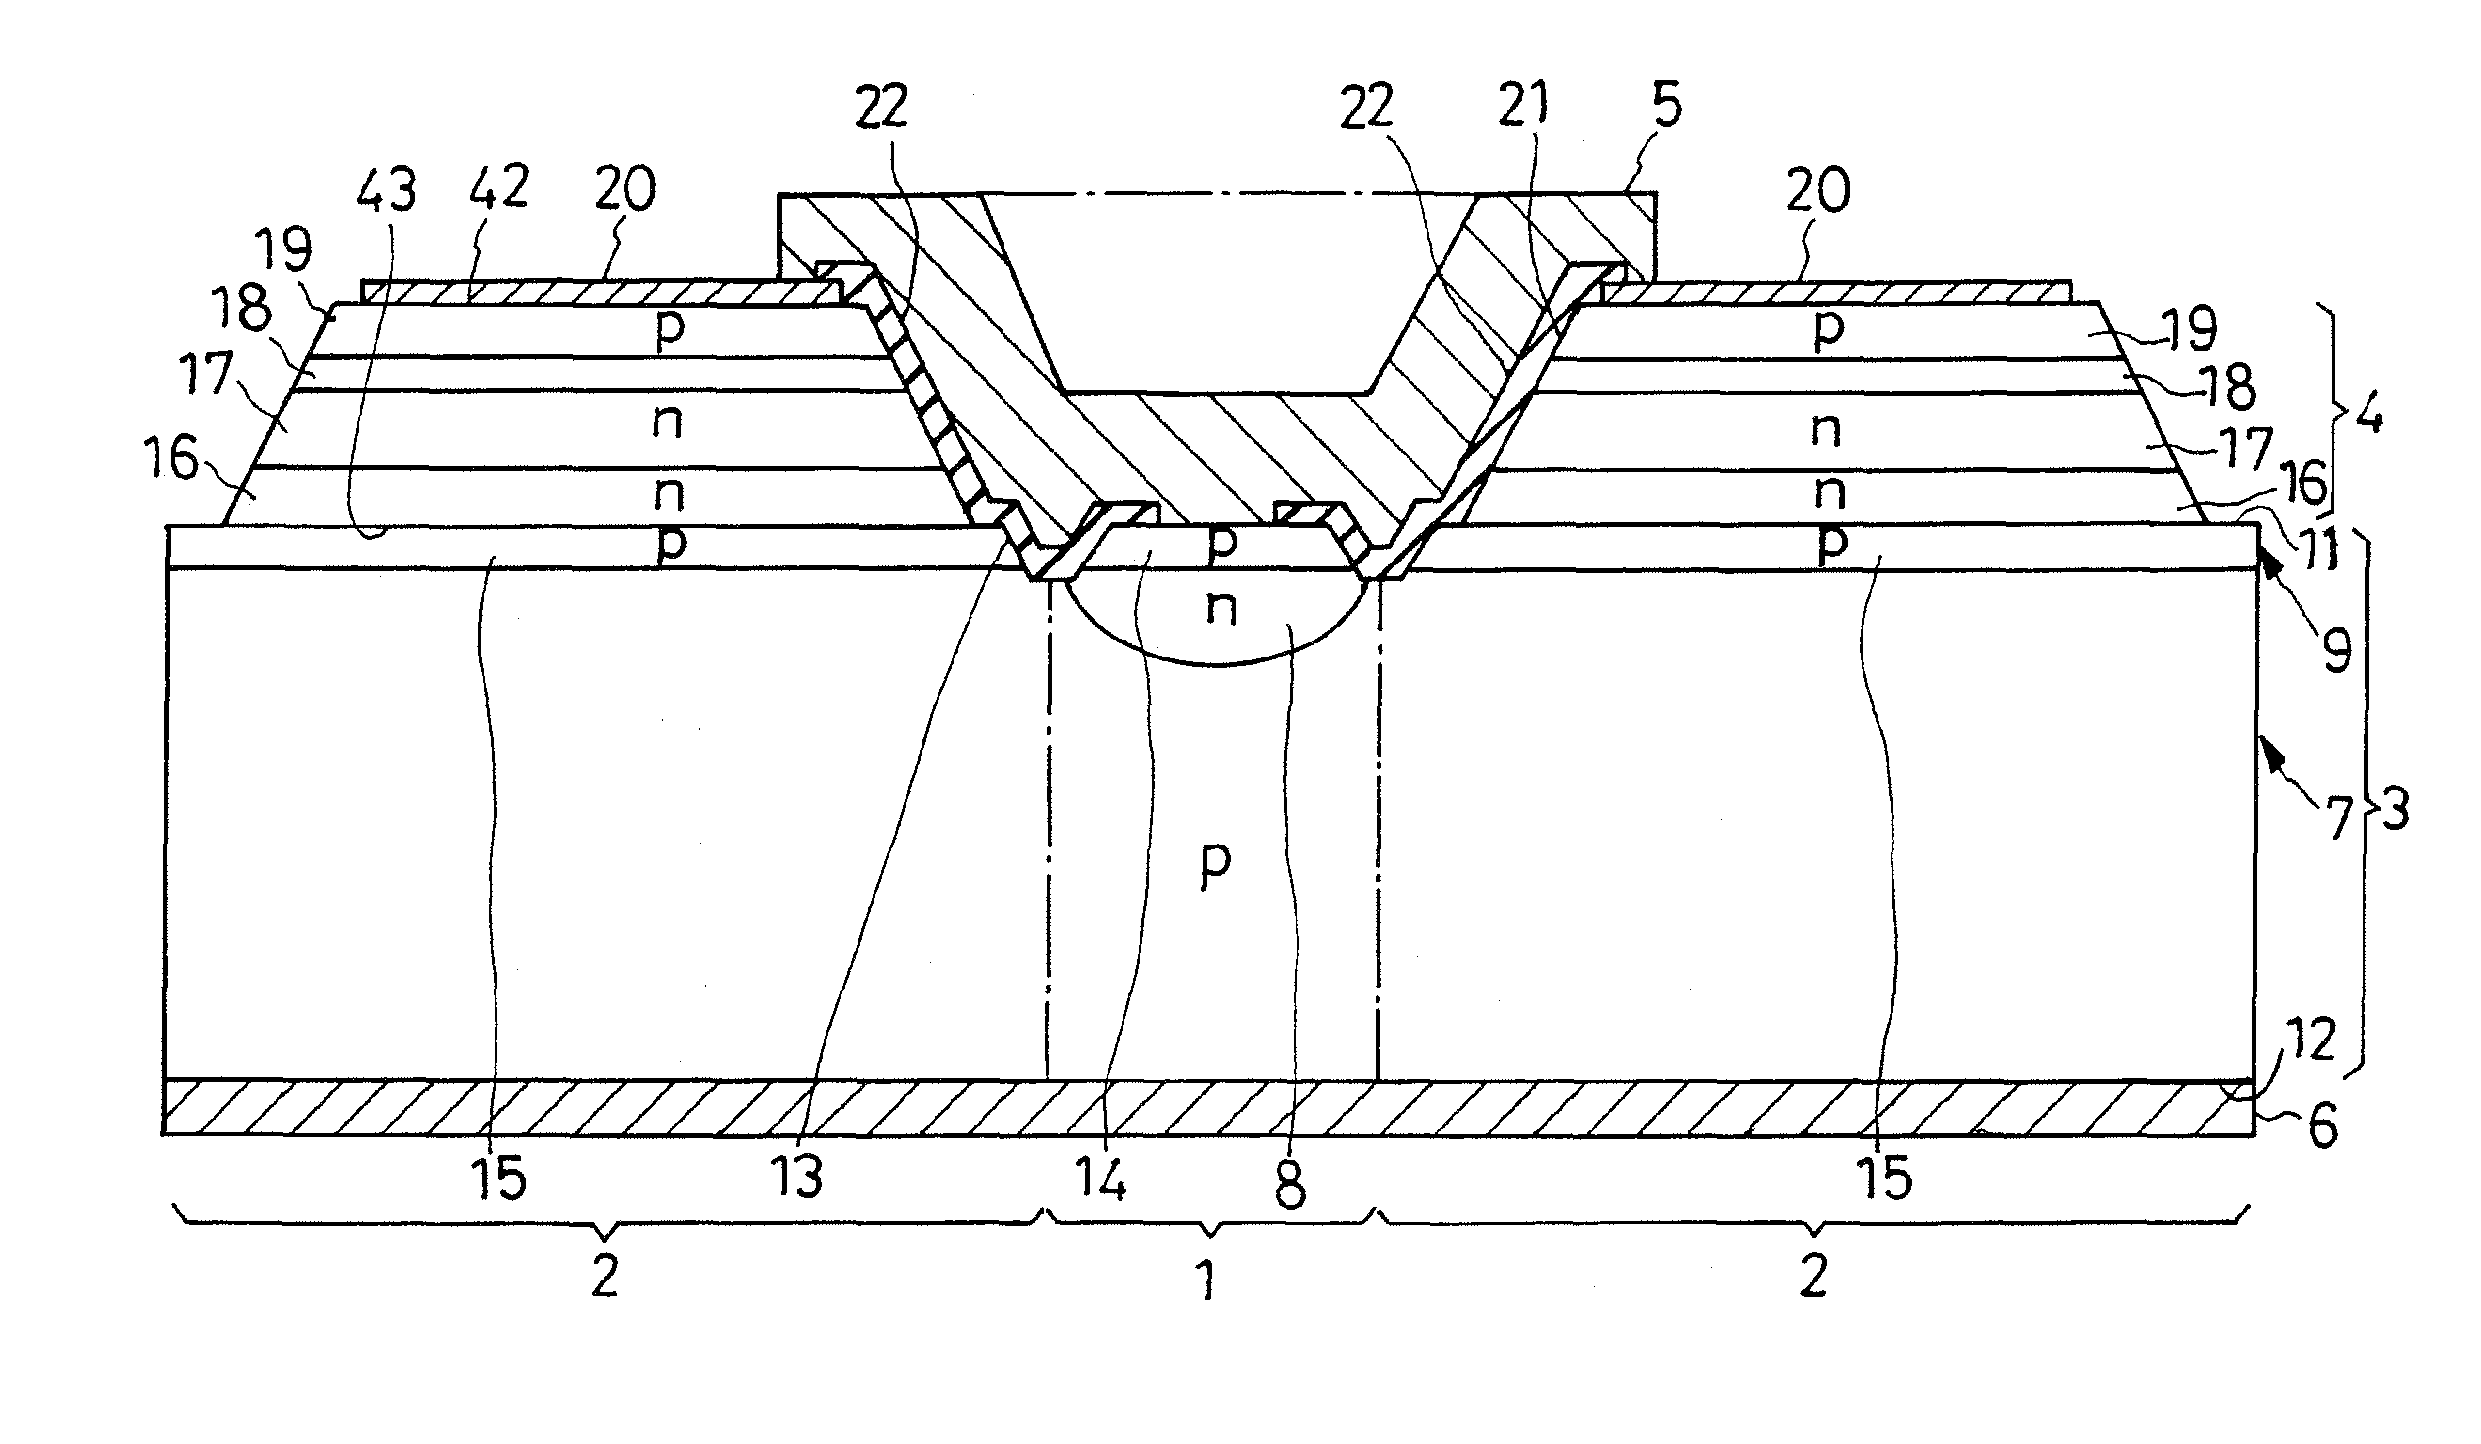 Overvoltage-protected light-emitting semiconductor device, and method of fabrication